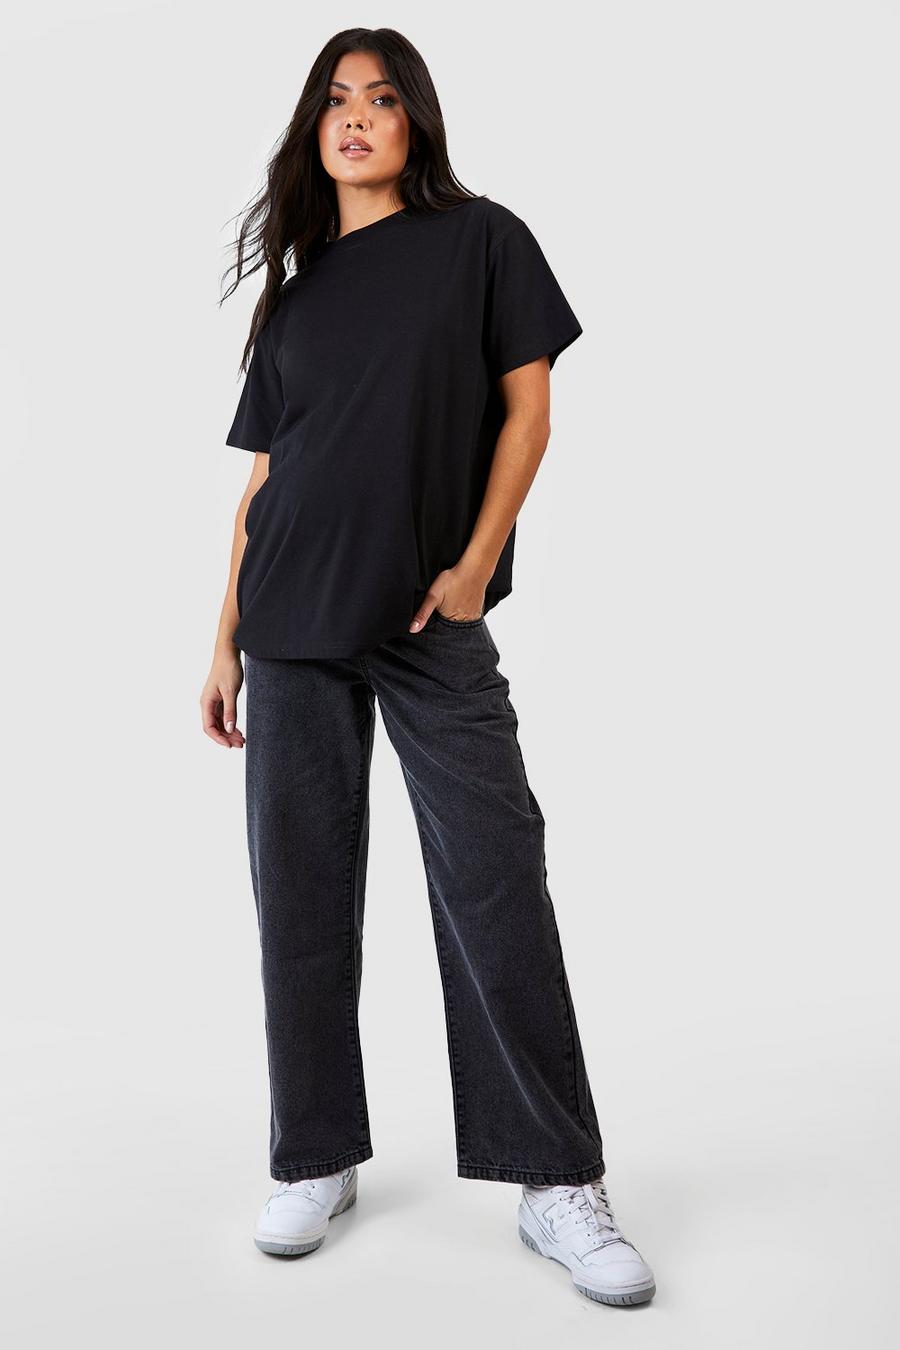 Washed black Maternity Over Bump Boyfriend Jeans